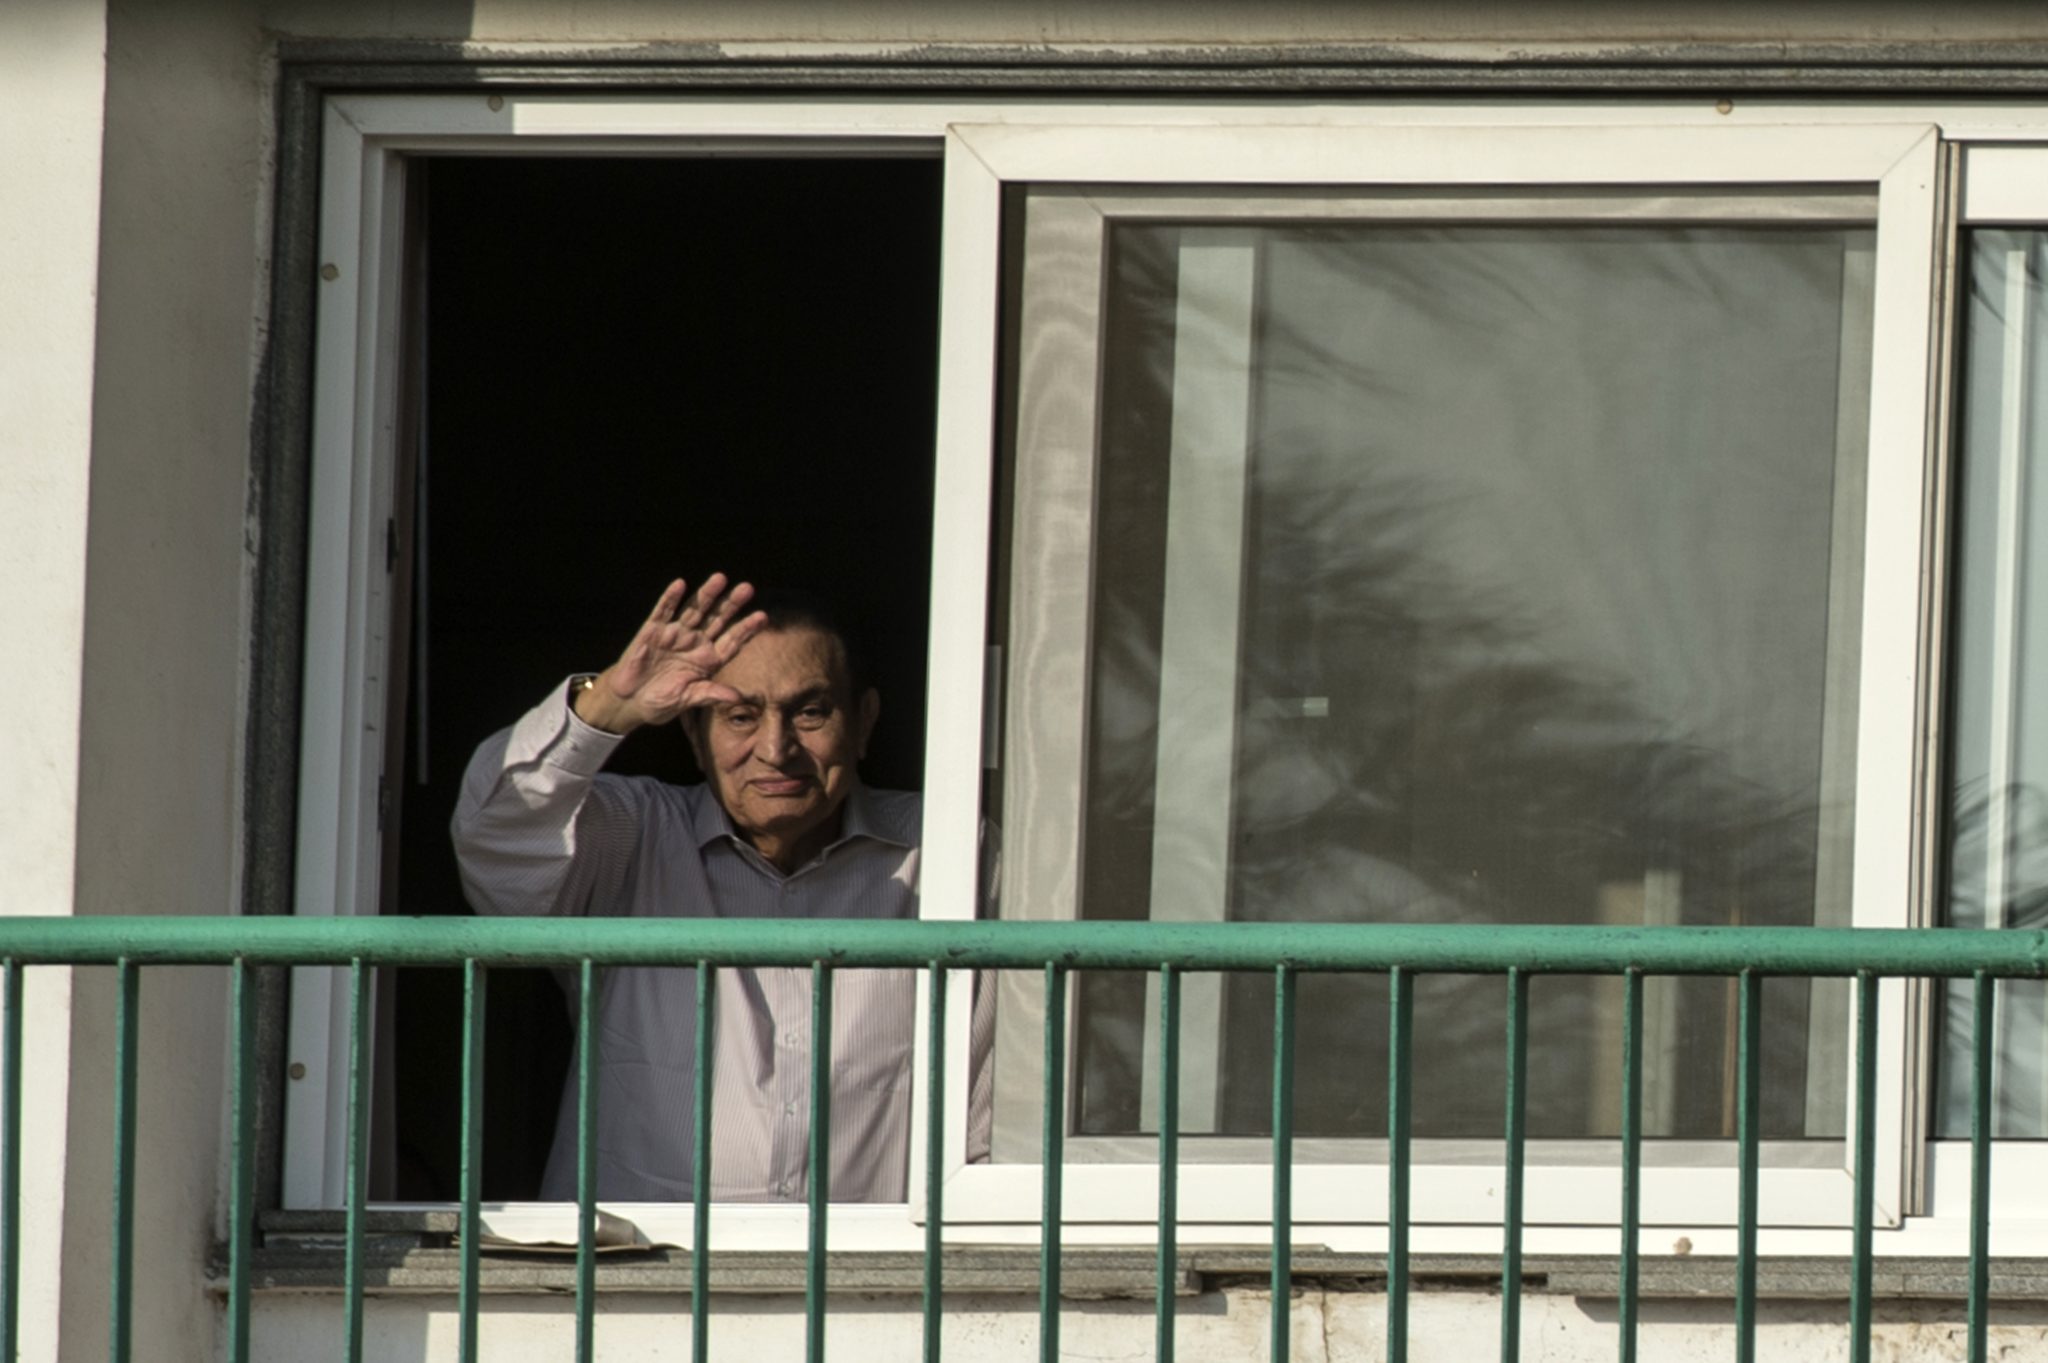 (FILES) This file photo taken on October 6, 2016 shows Egypt's former president Hosni Mubarak waving to people from his room at the Maadi military hospital in Cairo, as his supporters gather to celebrate the 43rd anniversary of October War victory. An Egyptian prosecutor allowed on March 13, 2017 for Mubarak to be released, his lawyer said, after an appeals court acquitted the ex-president of involvement in the killing of protesters during the 2011 uprising. / AFP PHOTO / KHALED DESOUKI